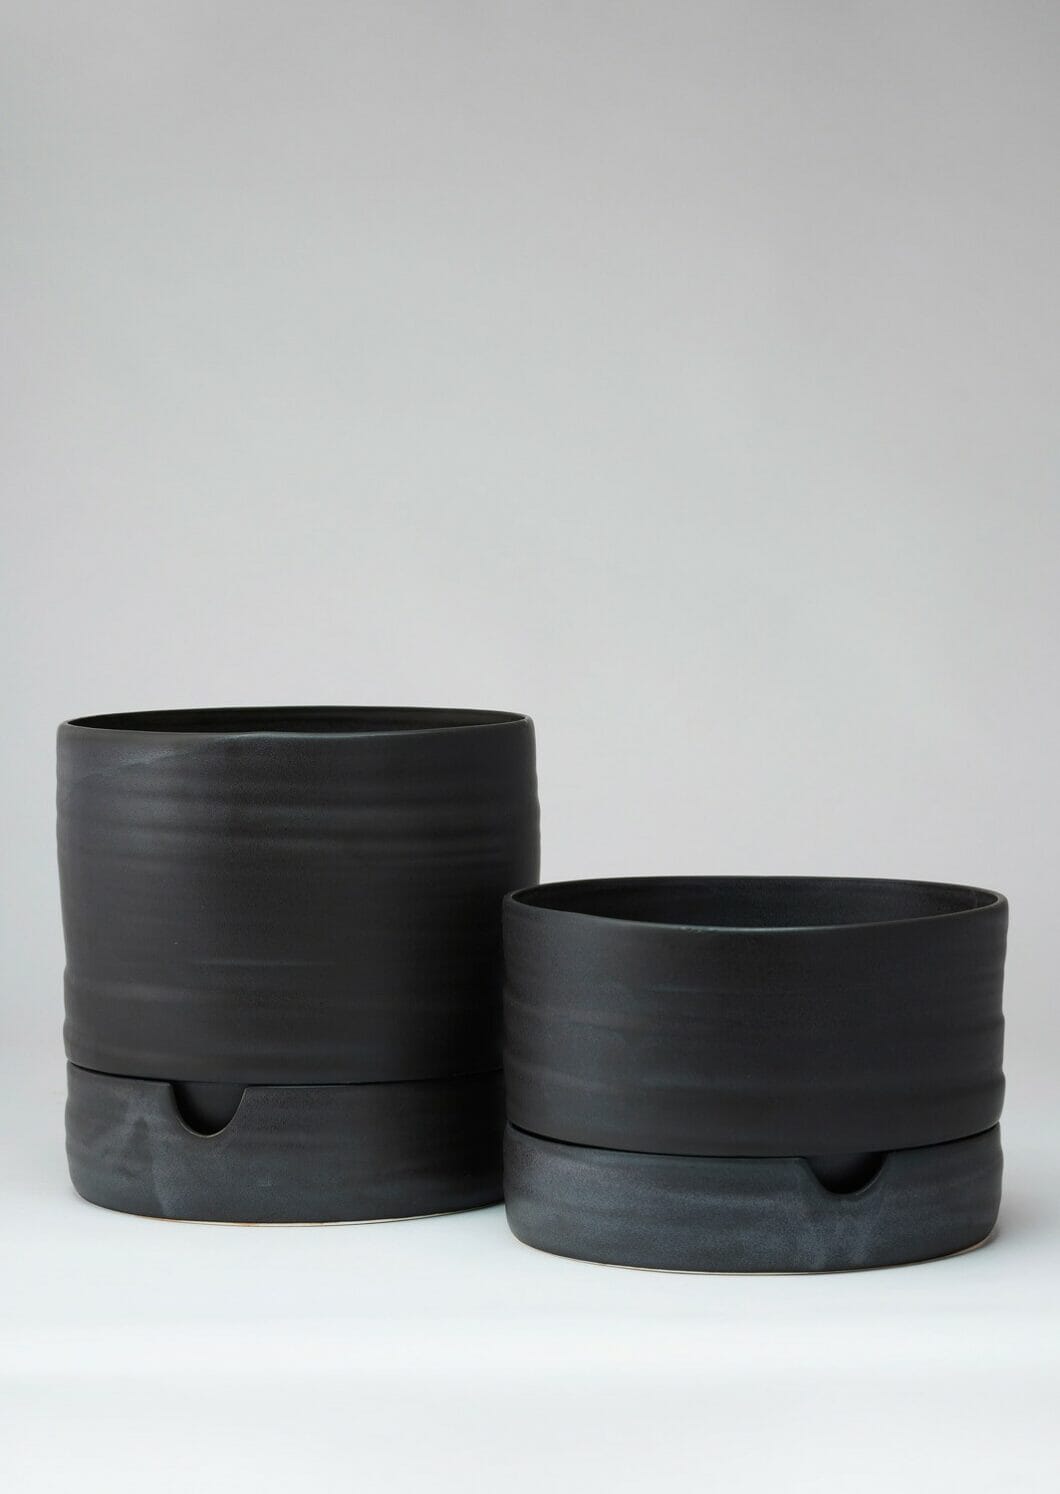 Self Watering Plant Pot Pots angus and Celeste 